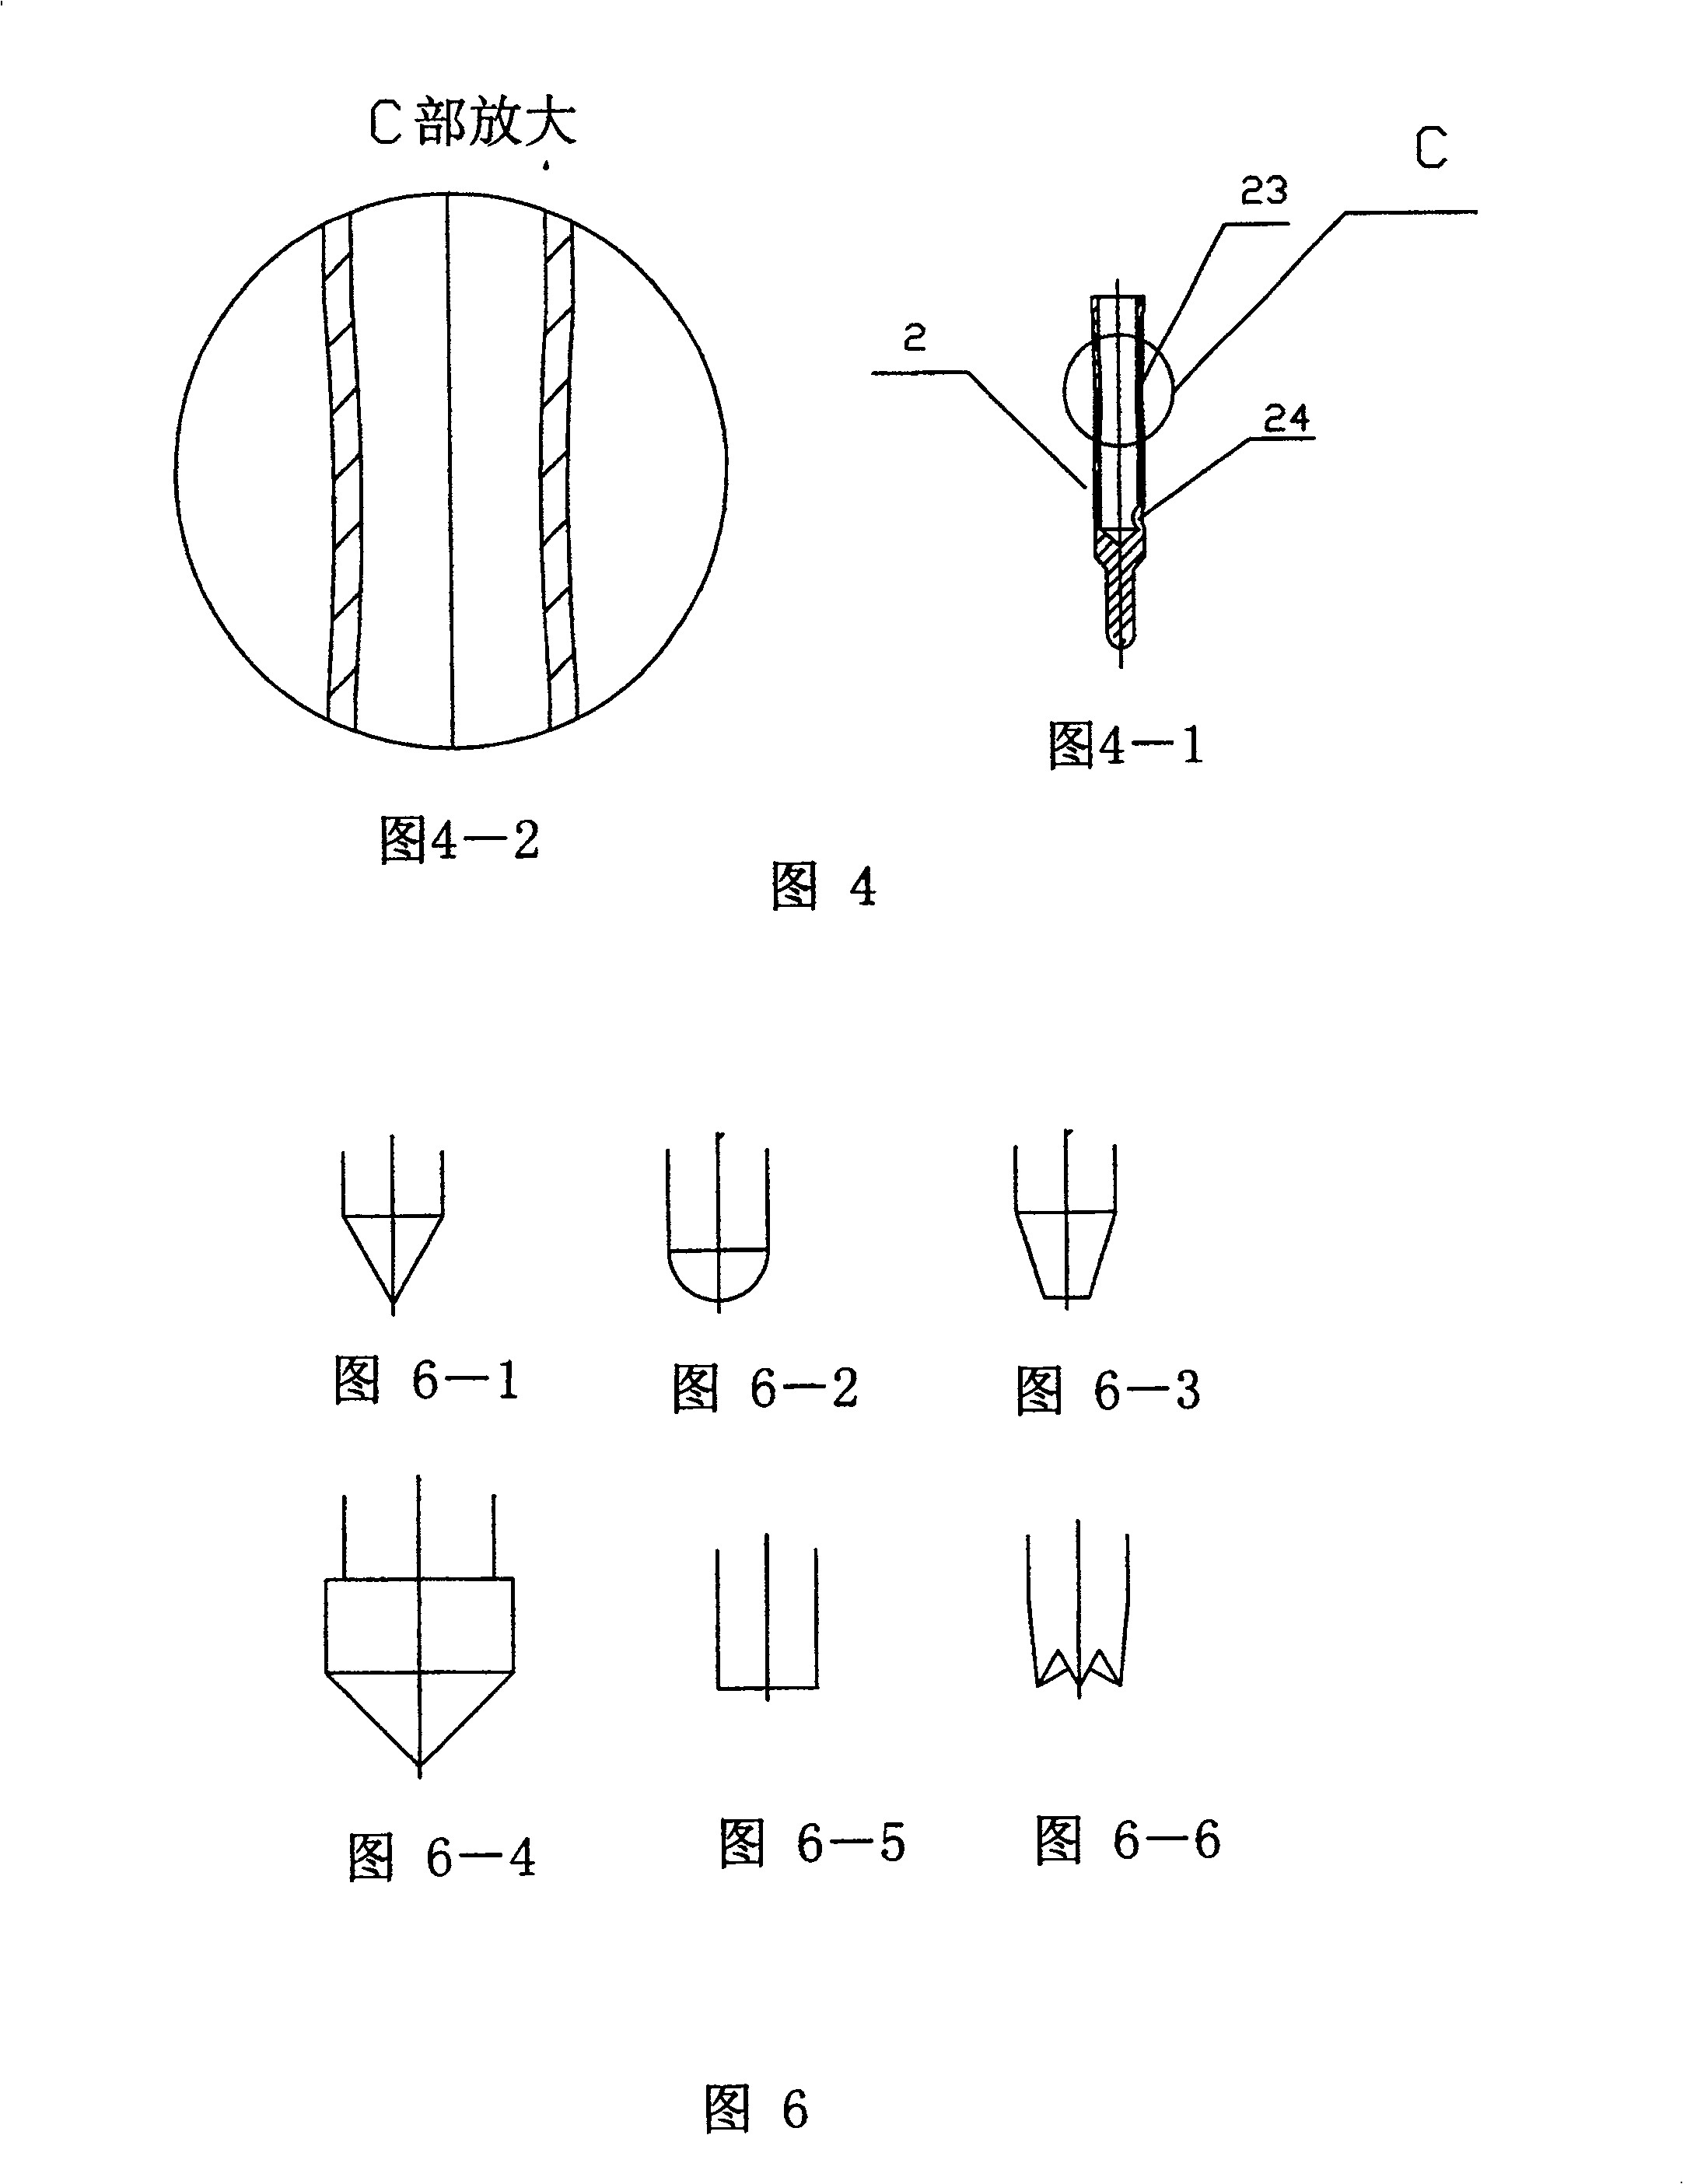 Combined probe for integrated circuit test